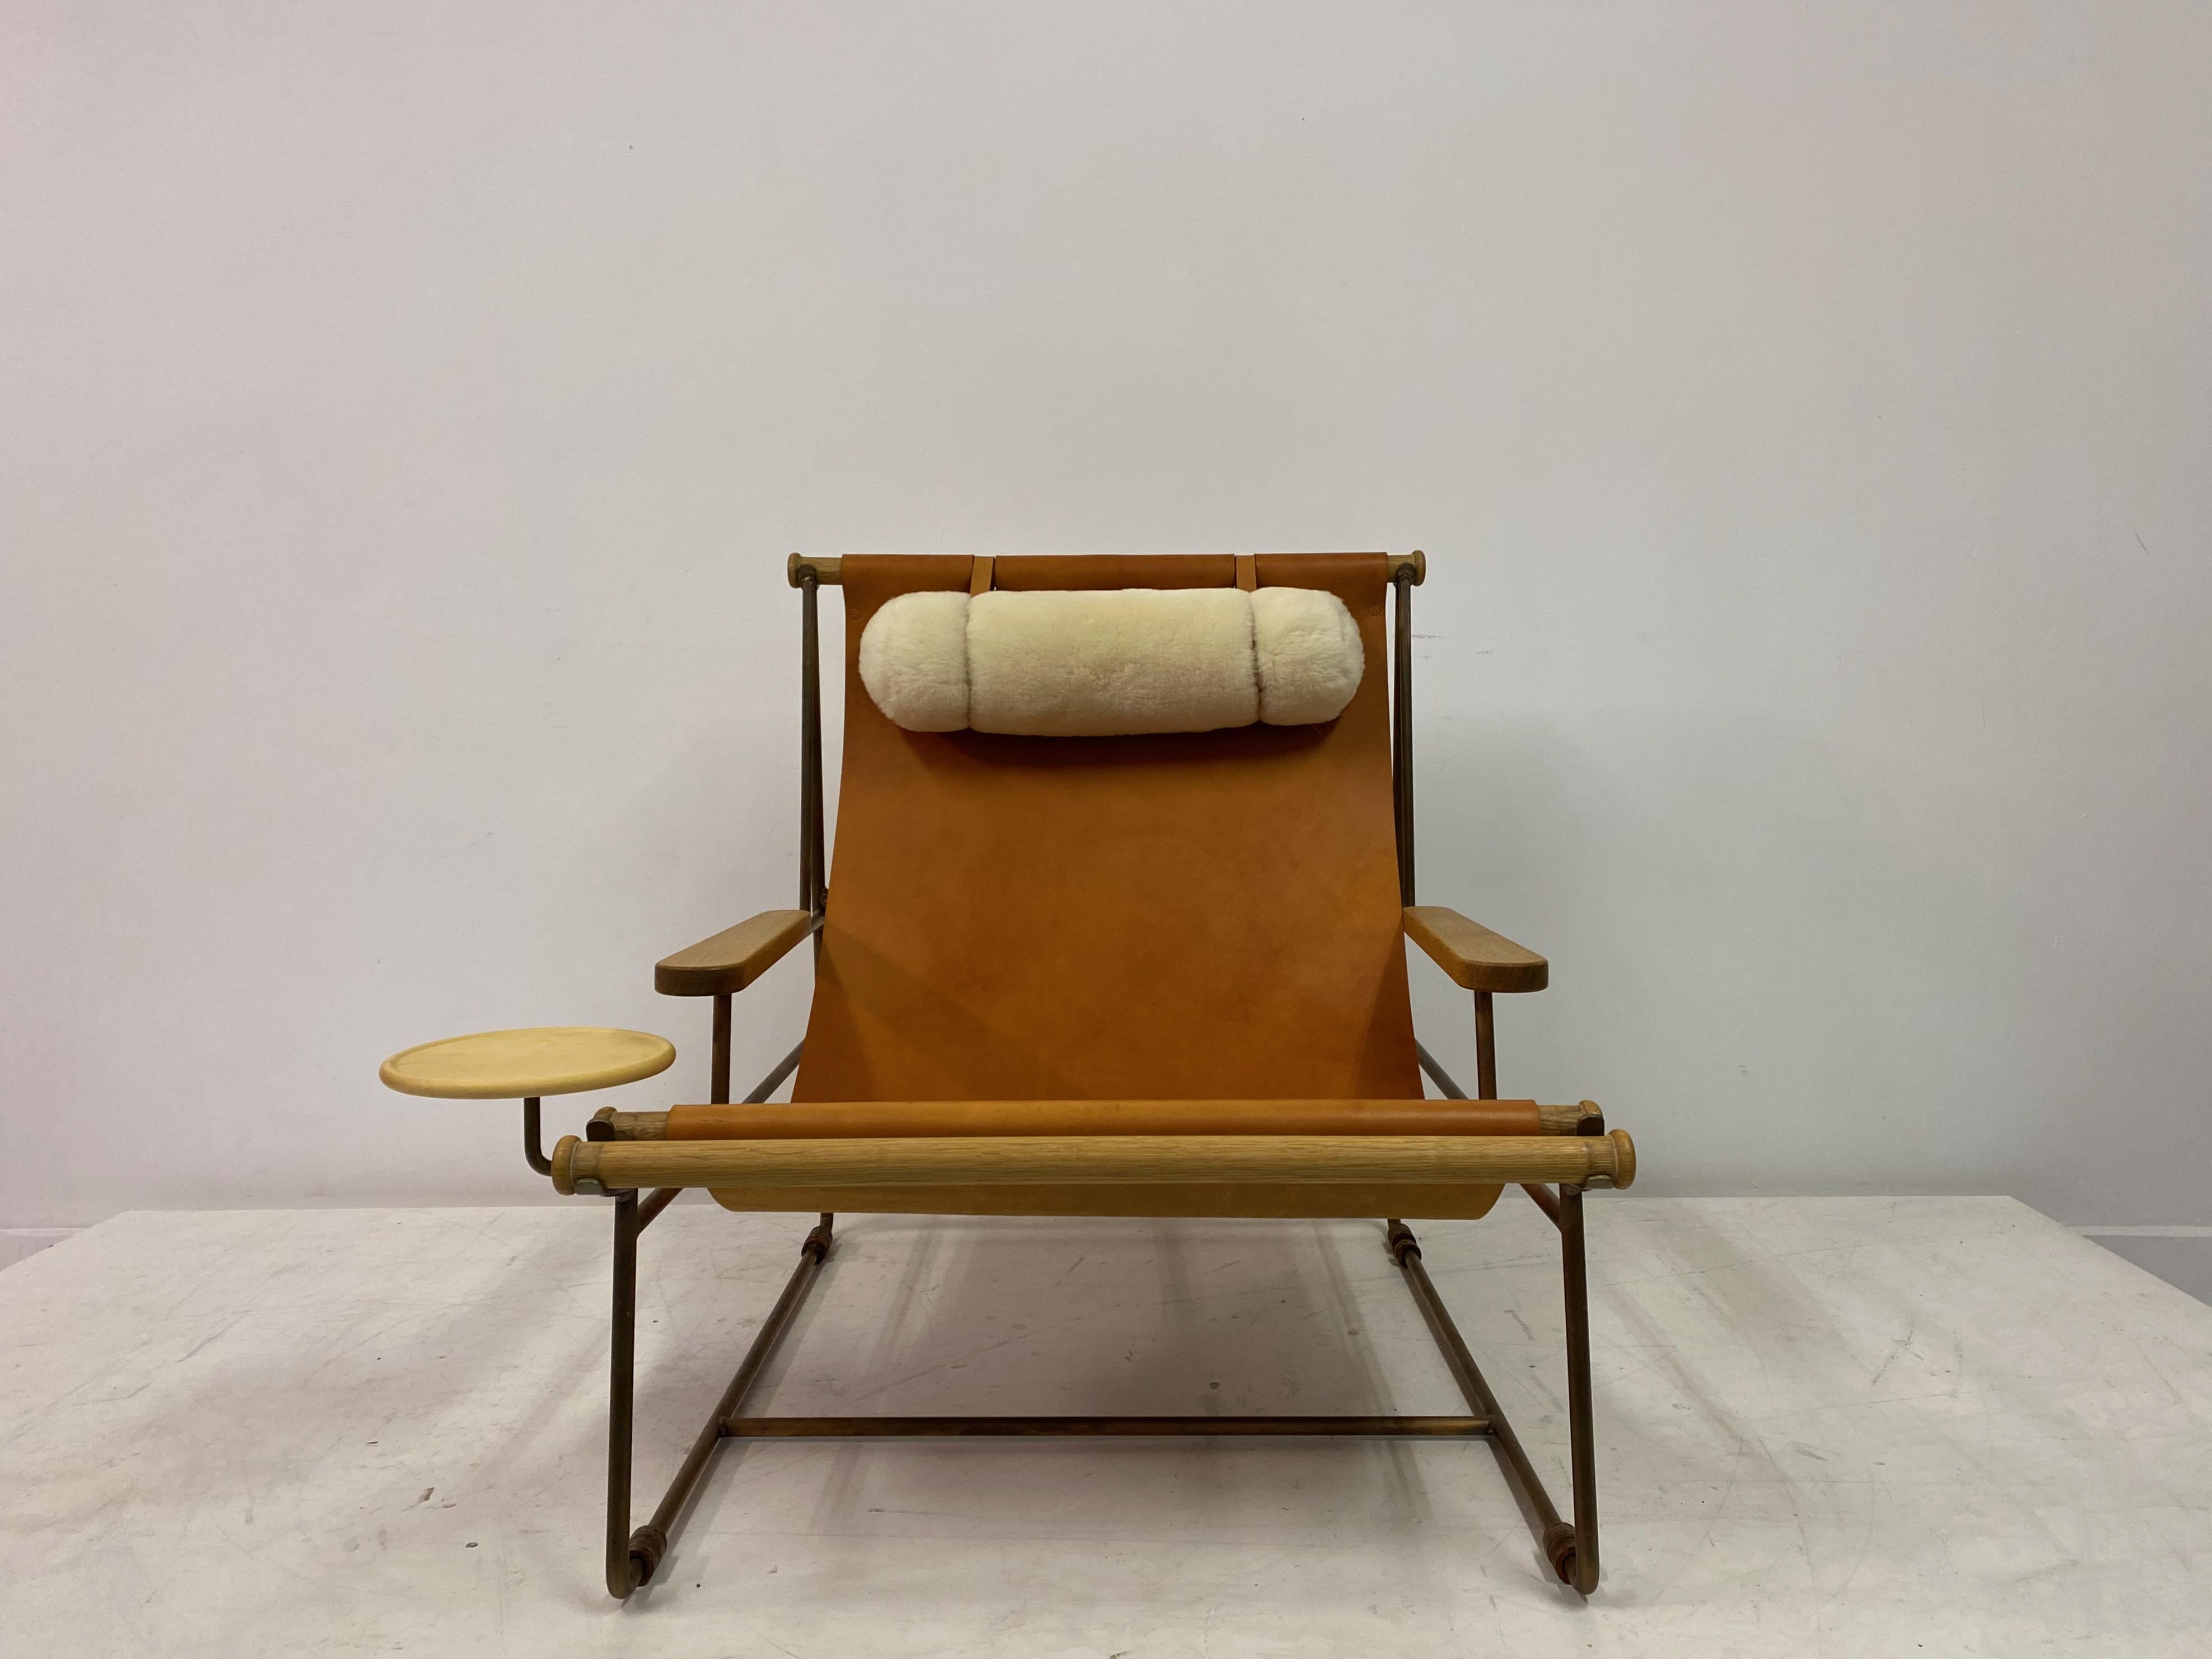 Leather lounge chair

Titled Deck chair

By Tyler Hays

For BDDW

Leather sling seat

Bronze frame

Shearling pillow

USA 21st century.